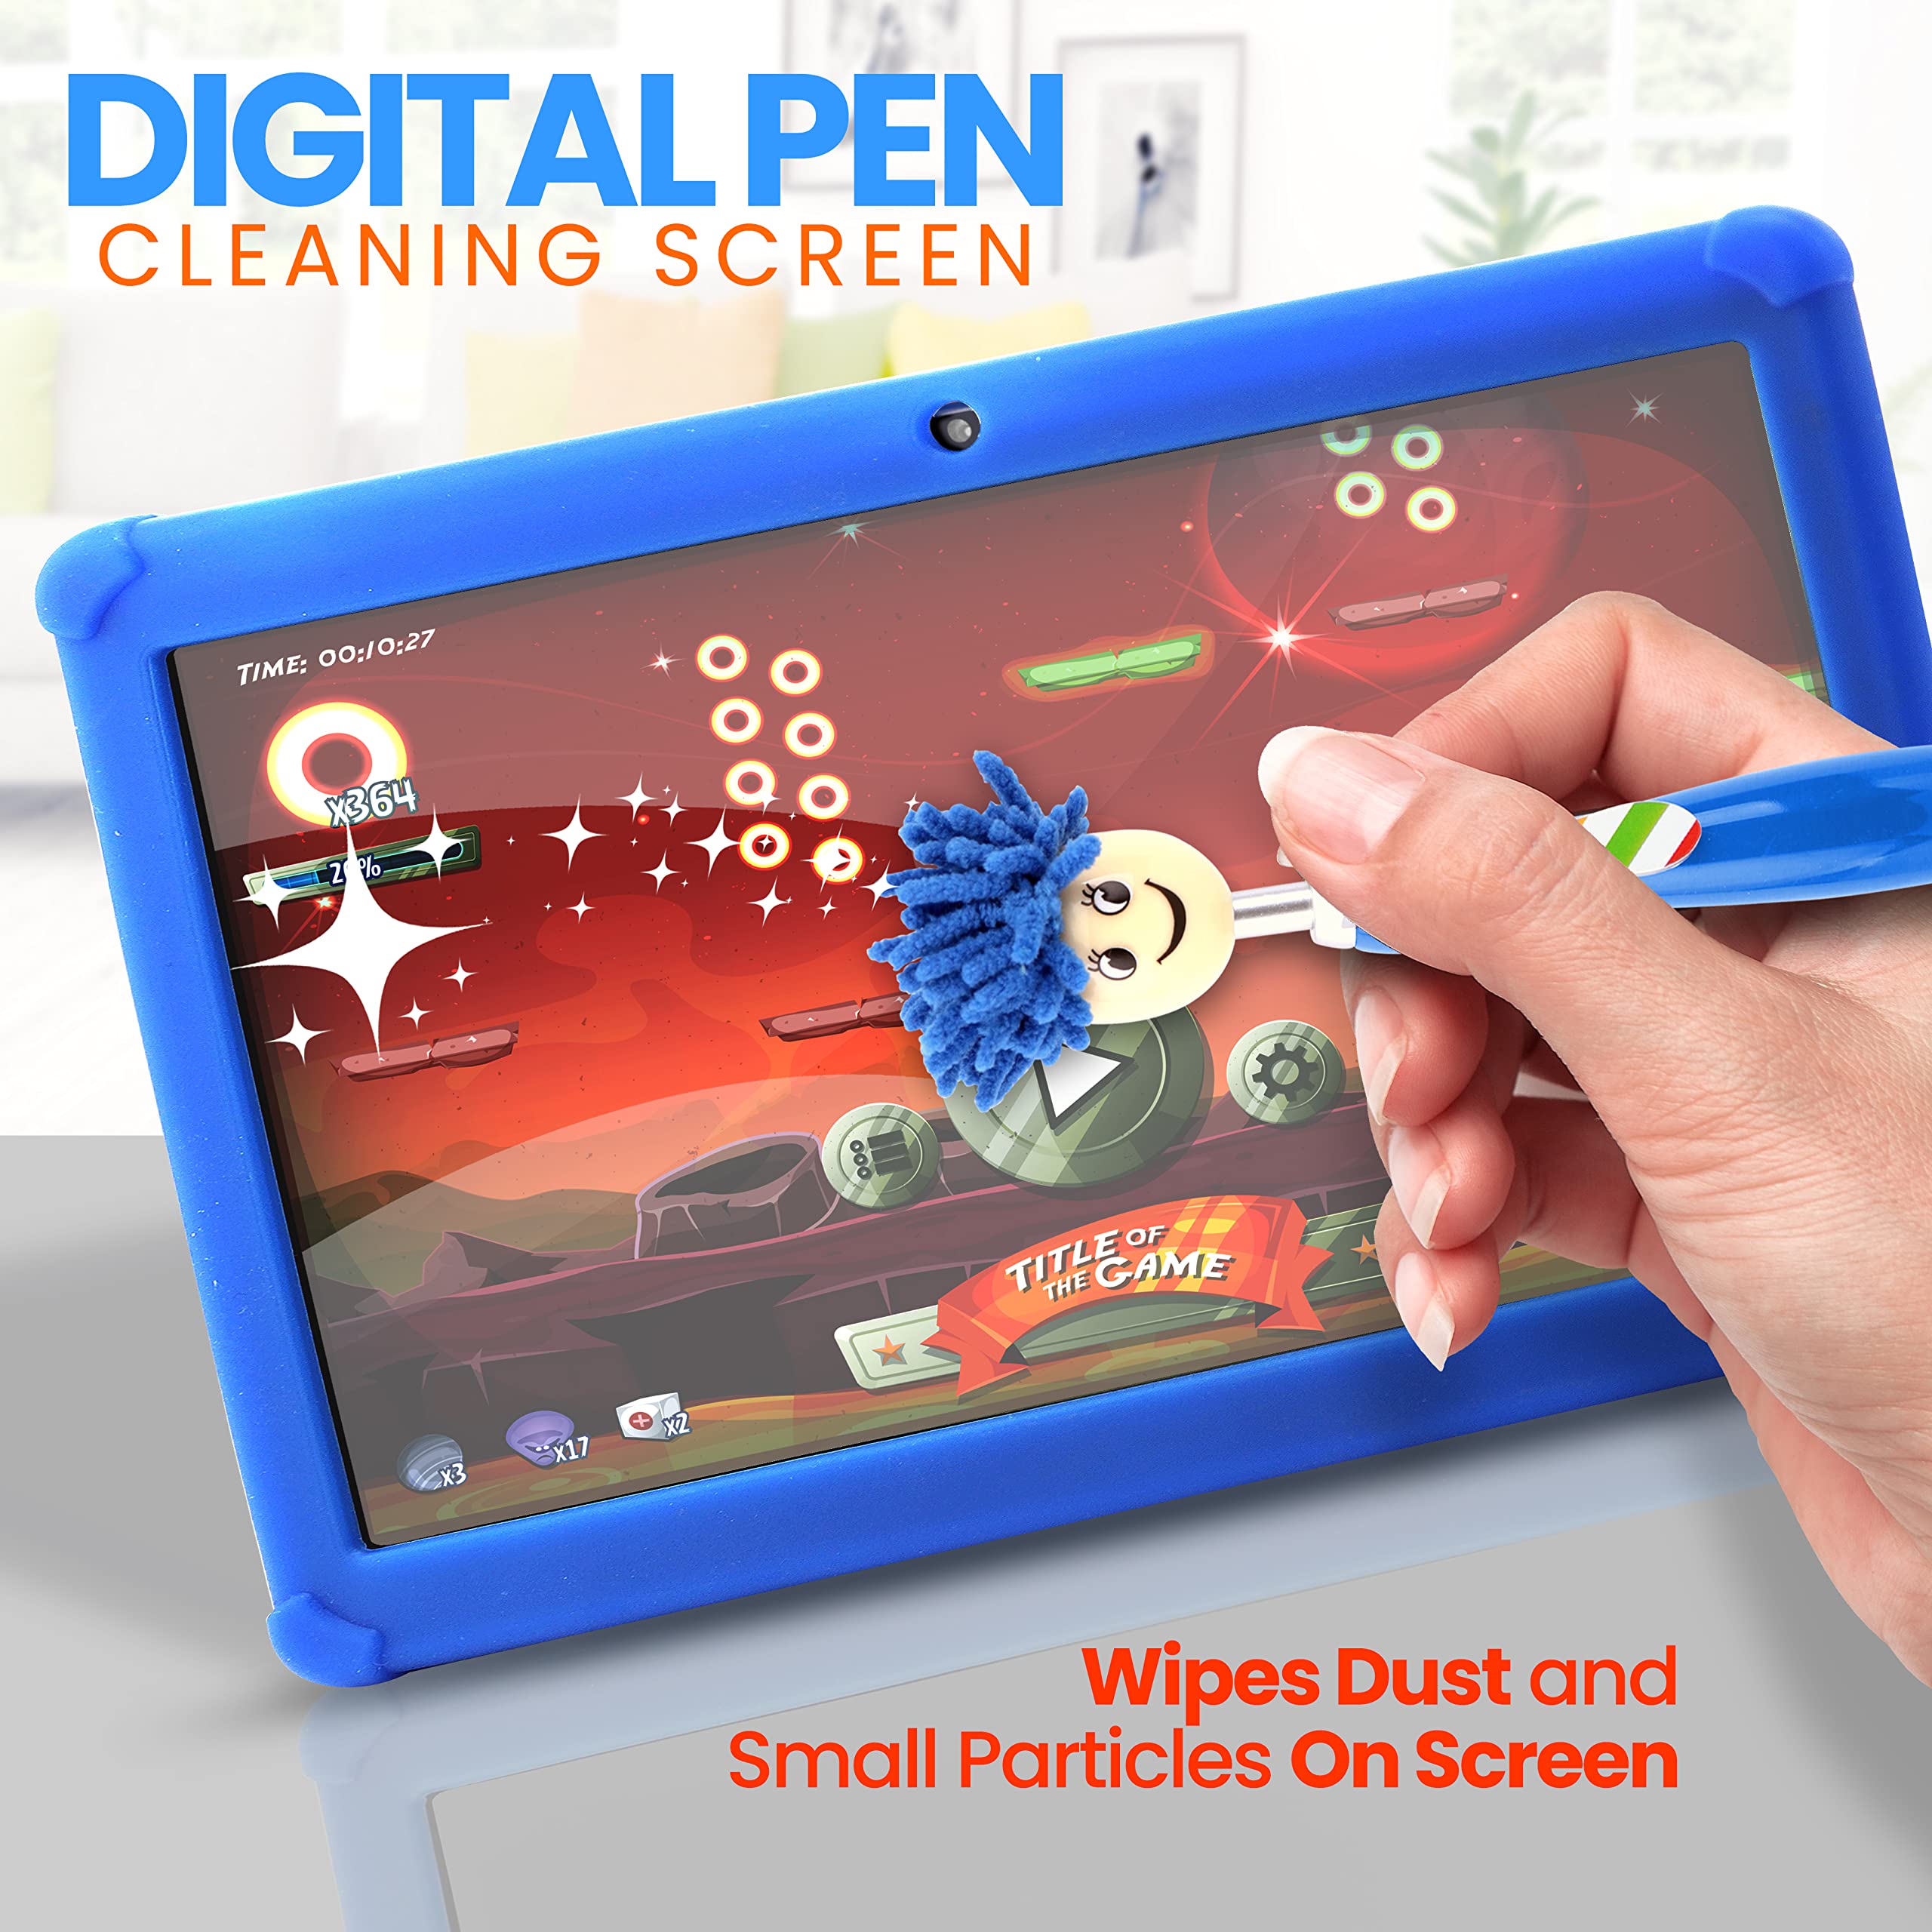 Pyle Kids Tablet with Stylus Pen,7 Android Tablet with 1080p HD Display, Dual Camera, WiFi Compatibility, Quad Core Processor, 1GB RAM, 8GB Storage, Blue Kid Proof Cover